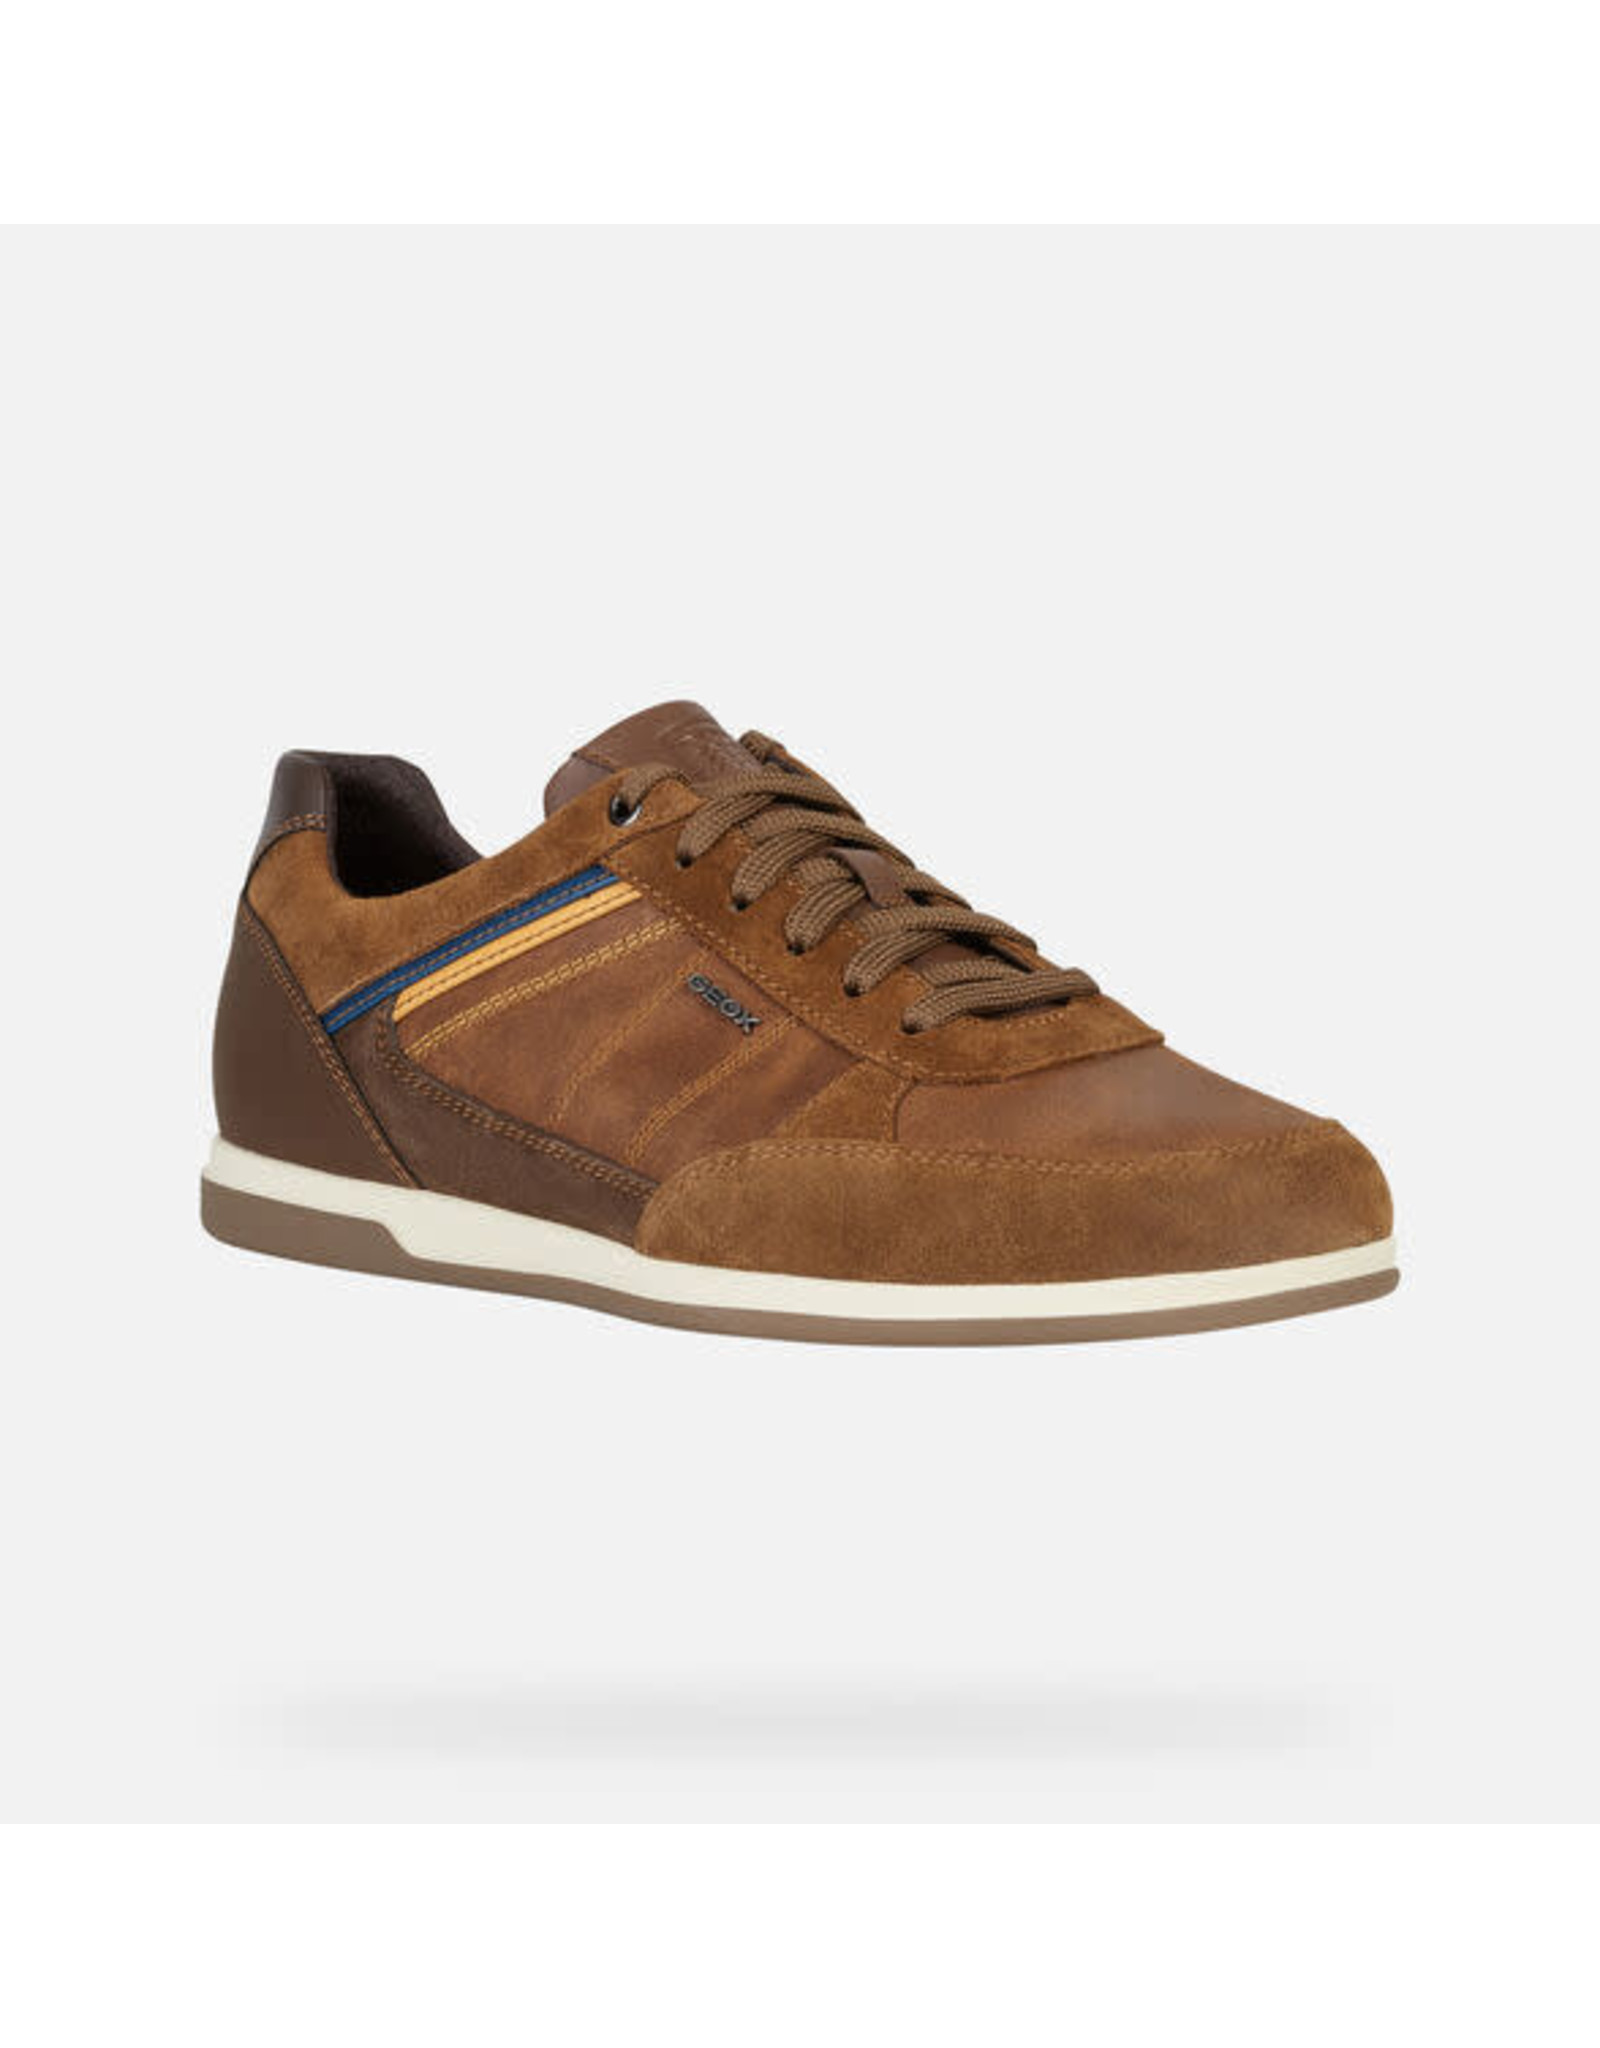 Geox Renan Man Mens Leather Trainers In